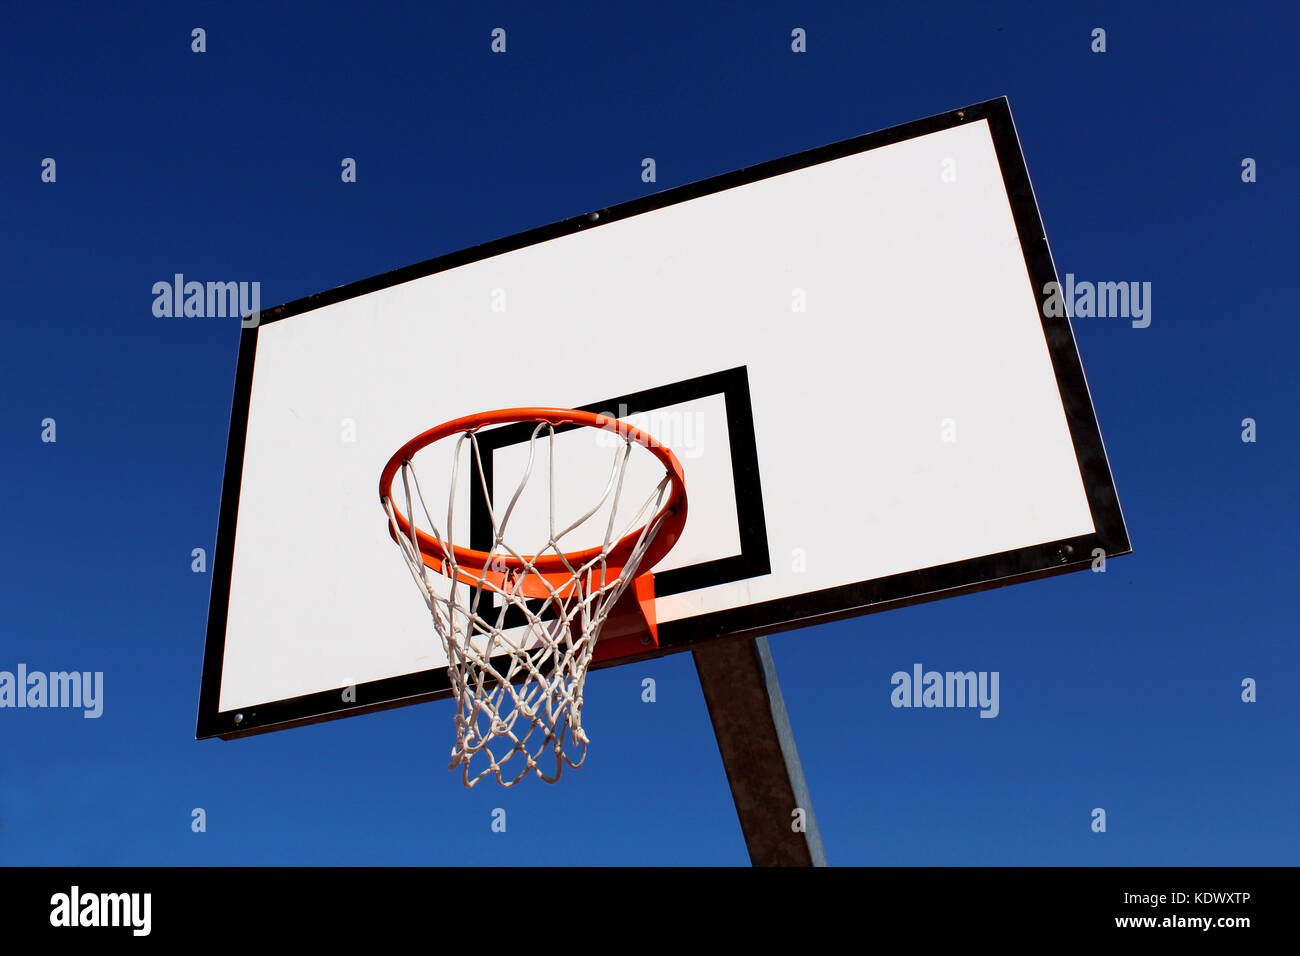 Basketball hoop against blue sky in a playground Stock Photo